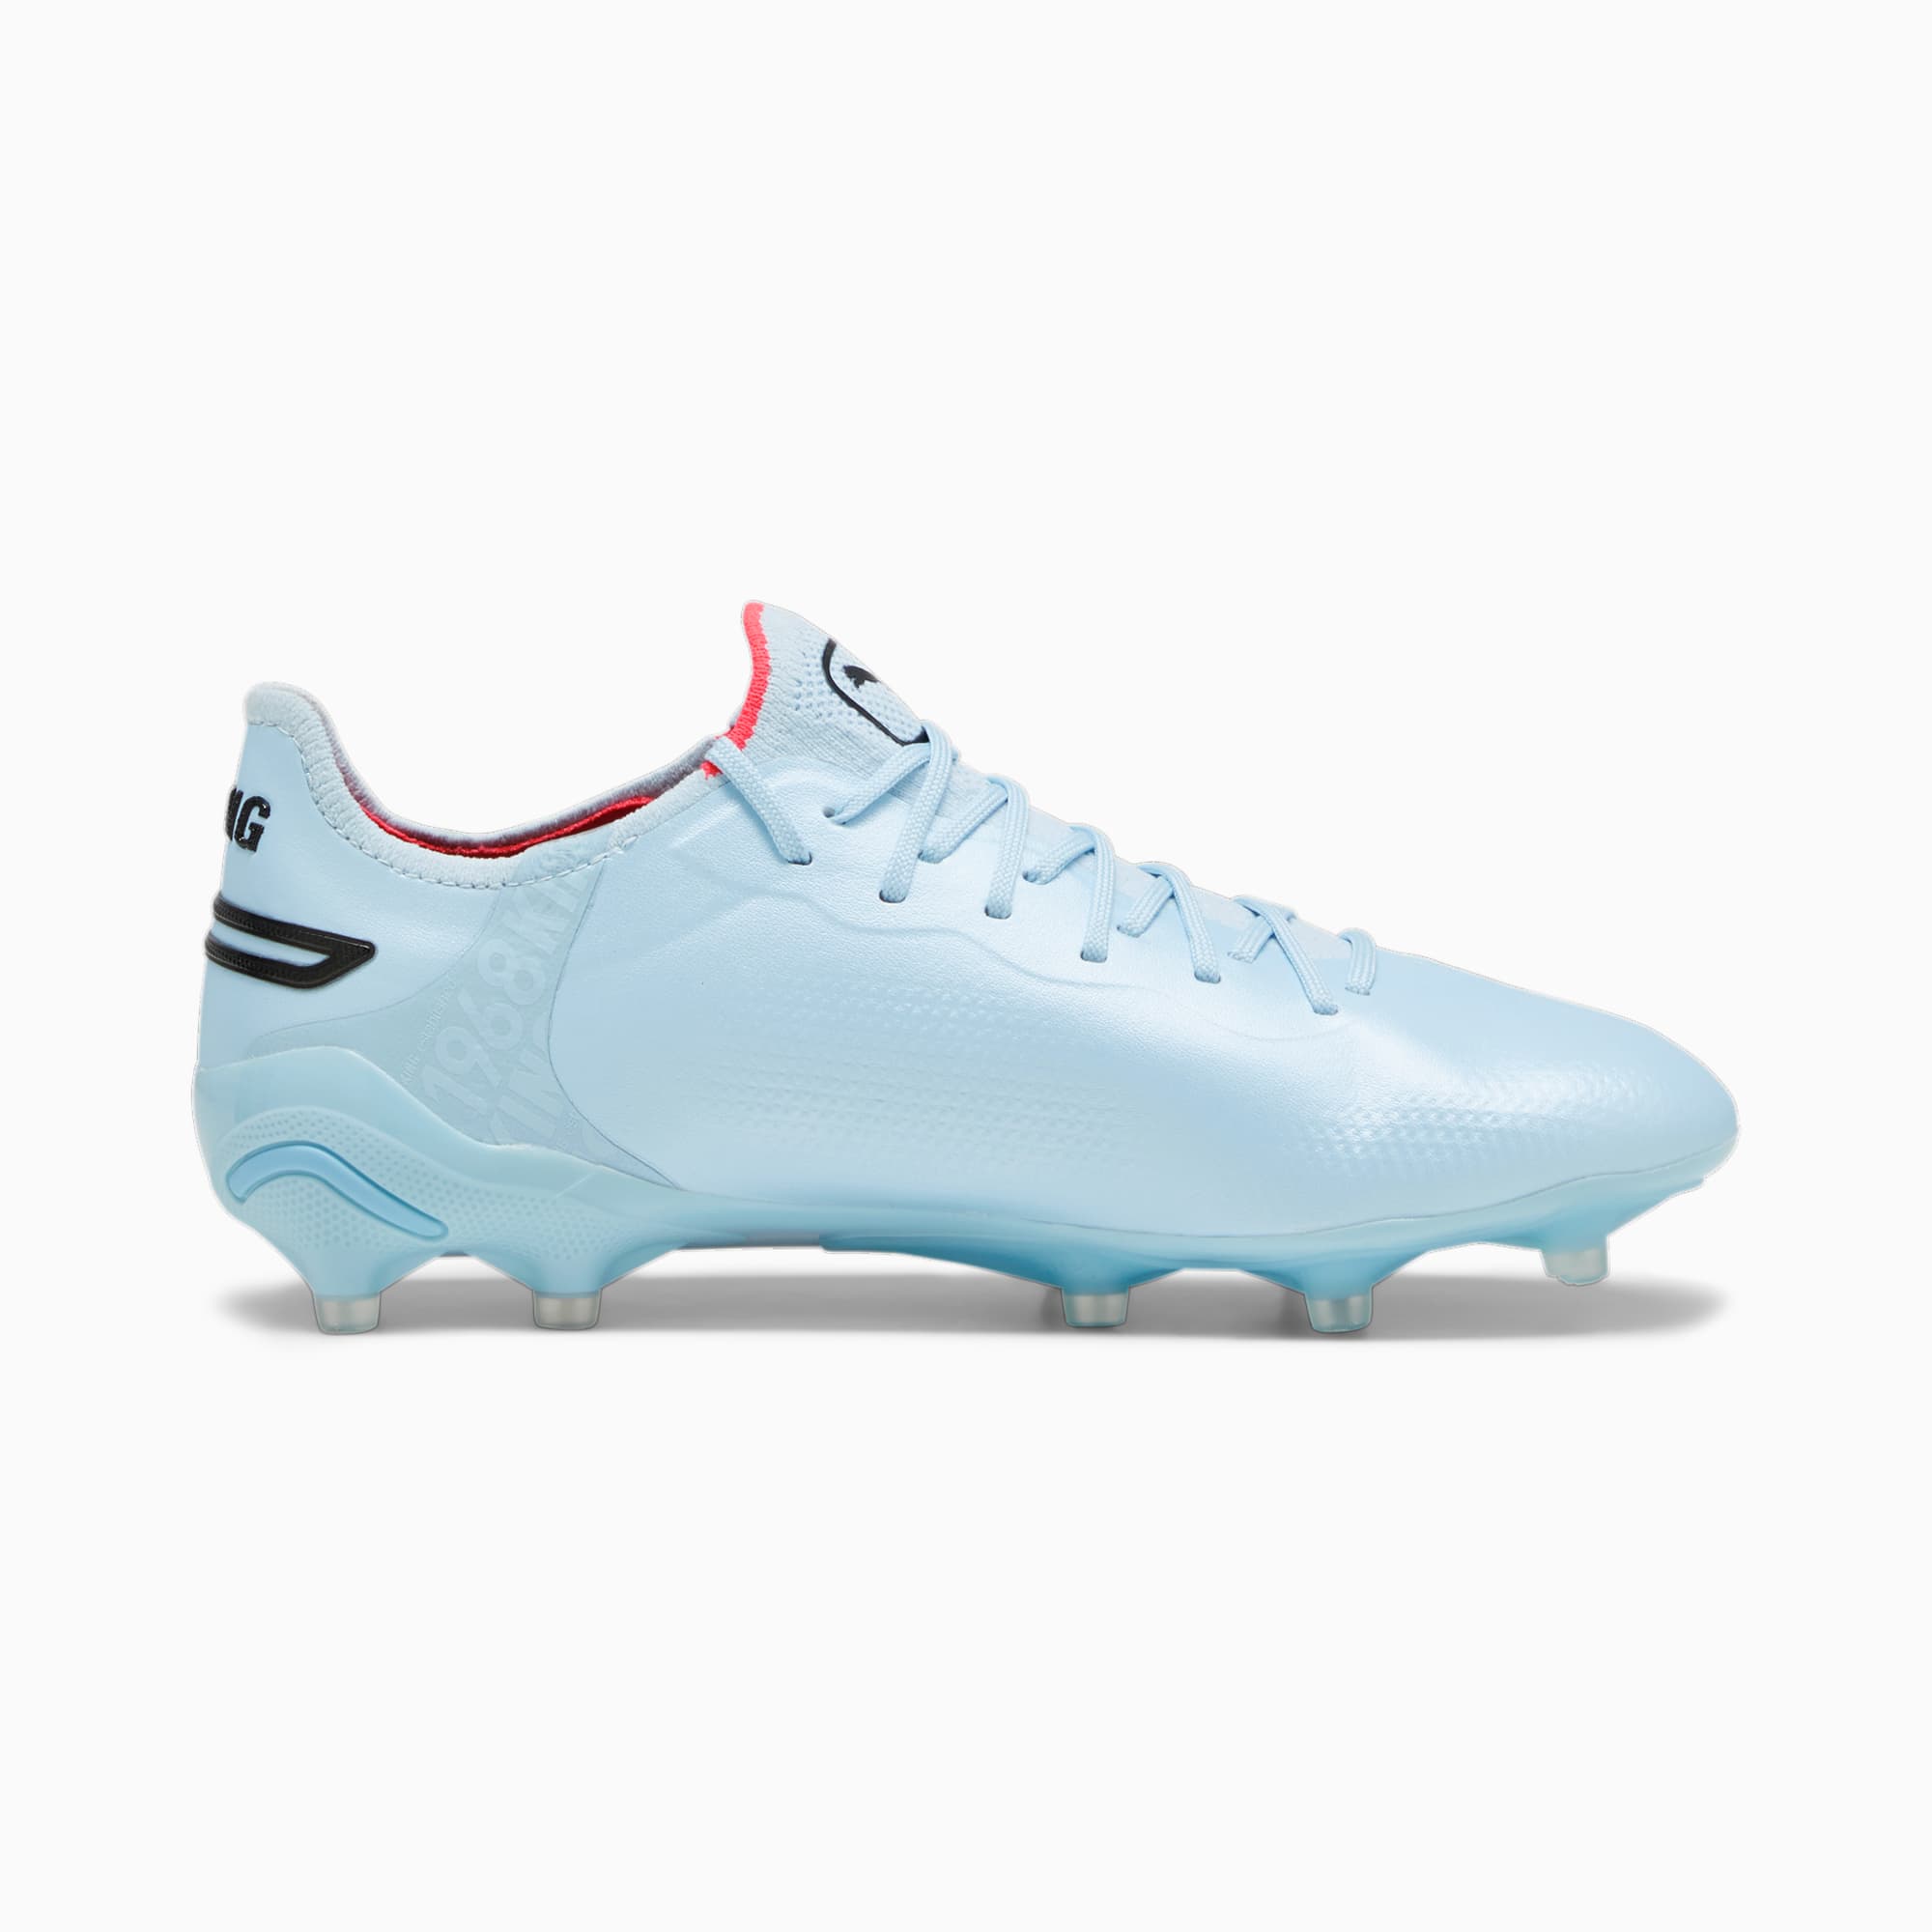 KING ULTIMATE FG/AG Women's Soccer Cleats | PUMA